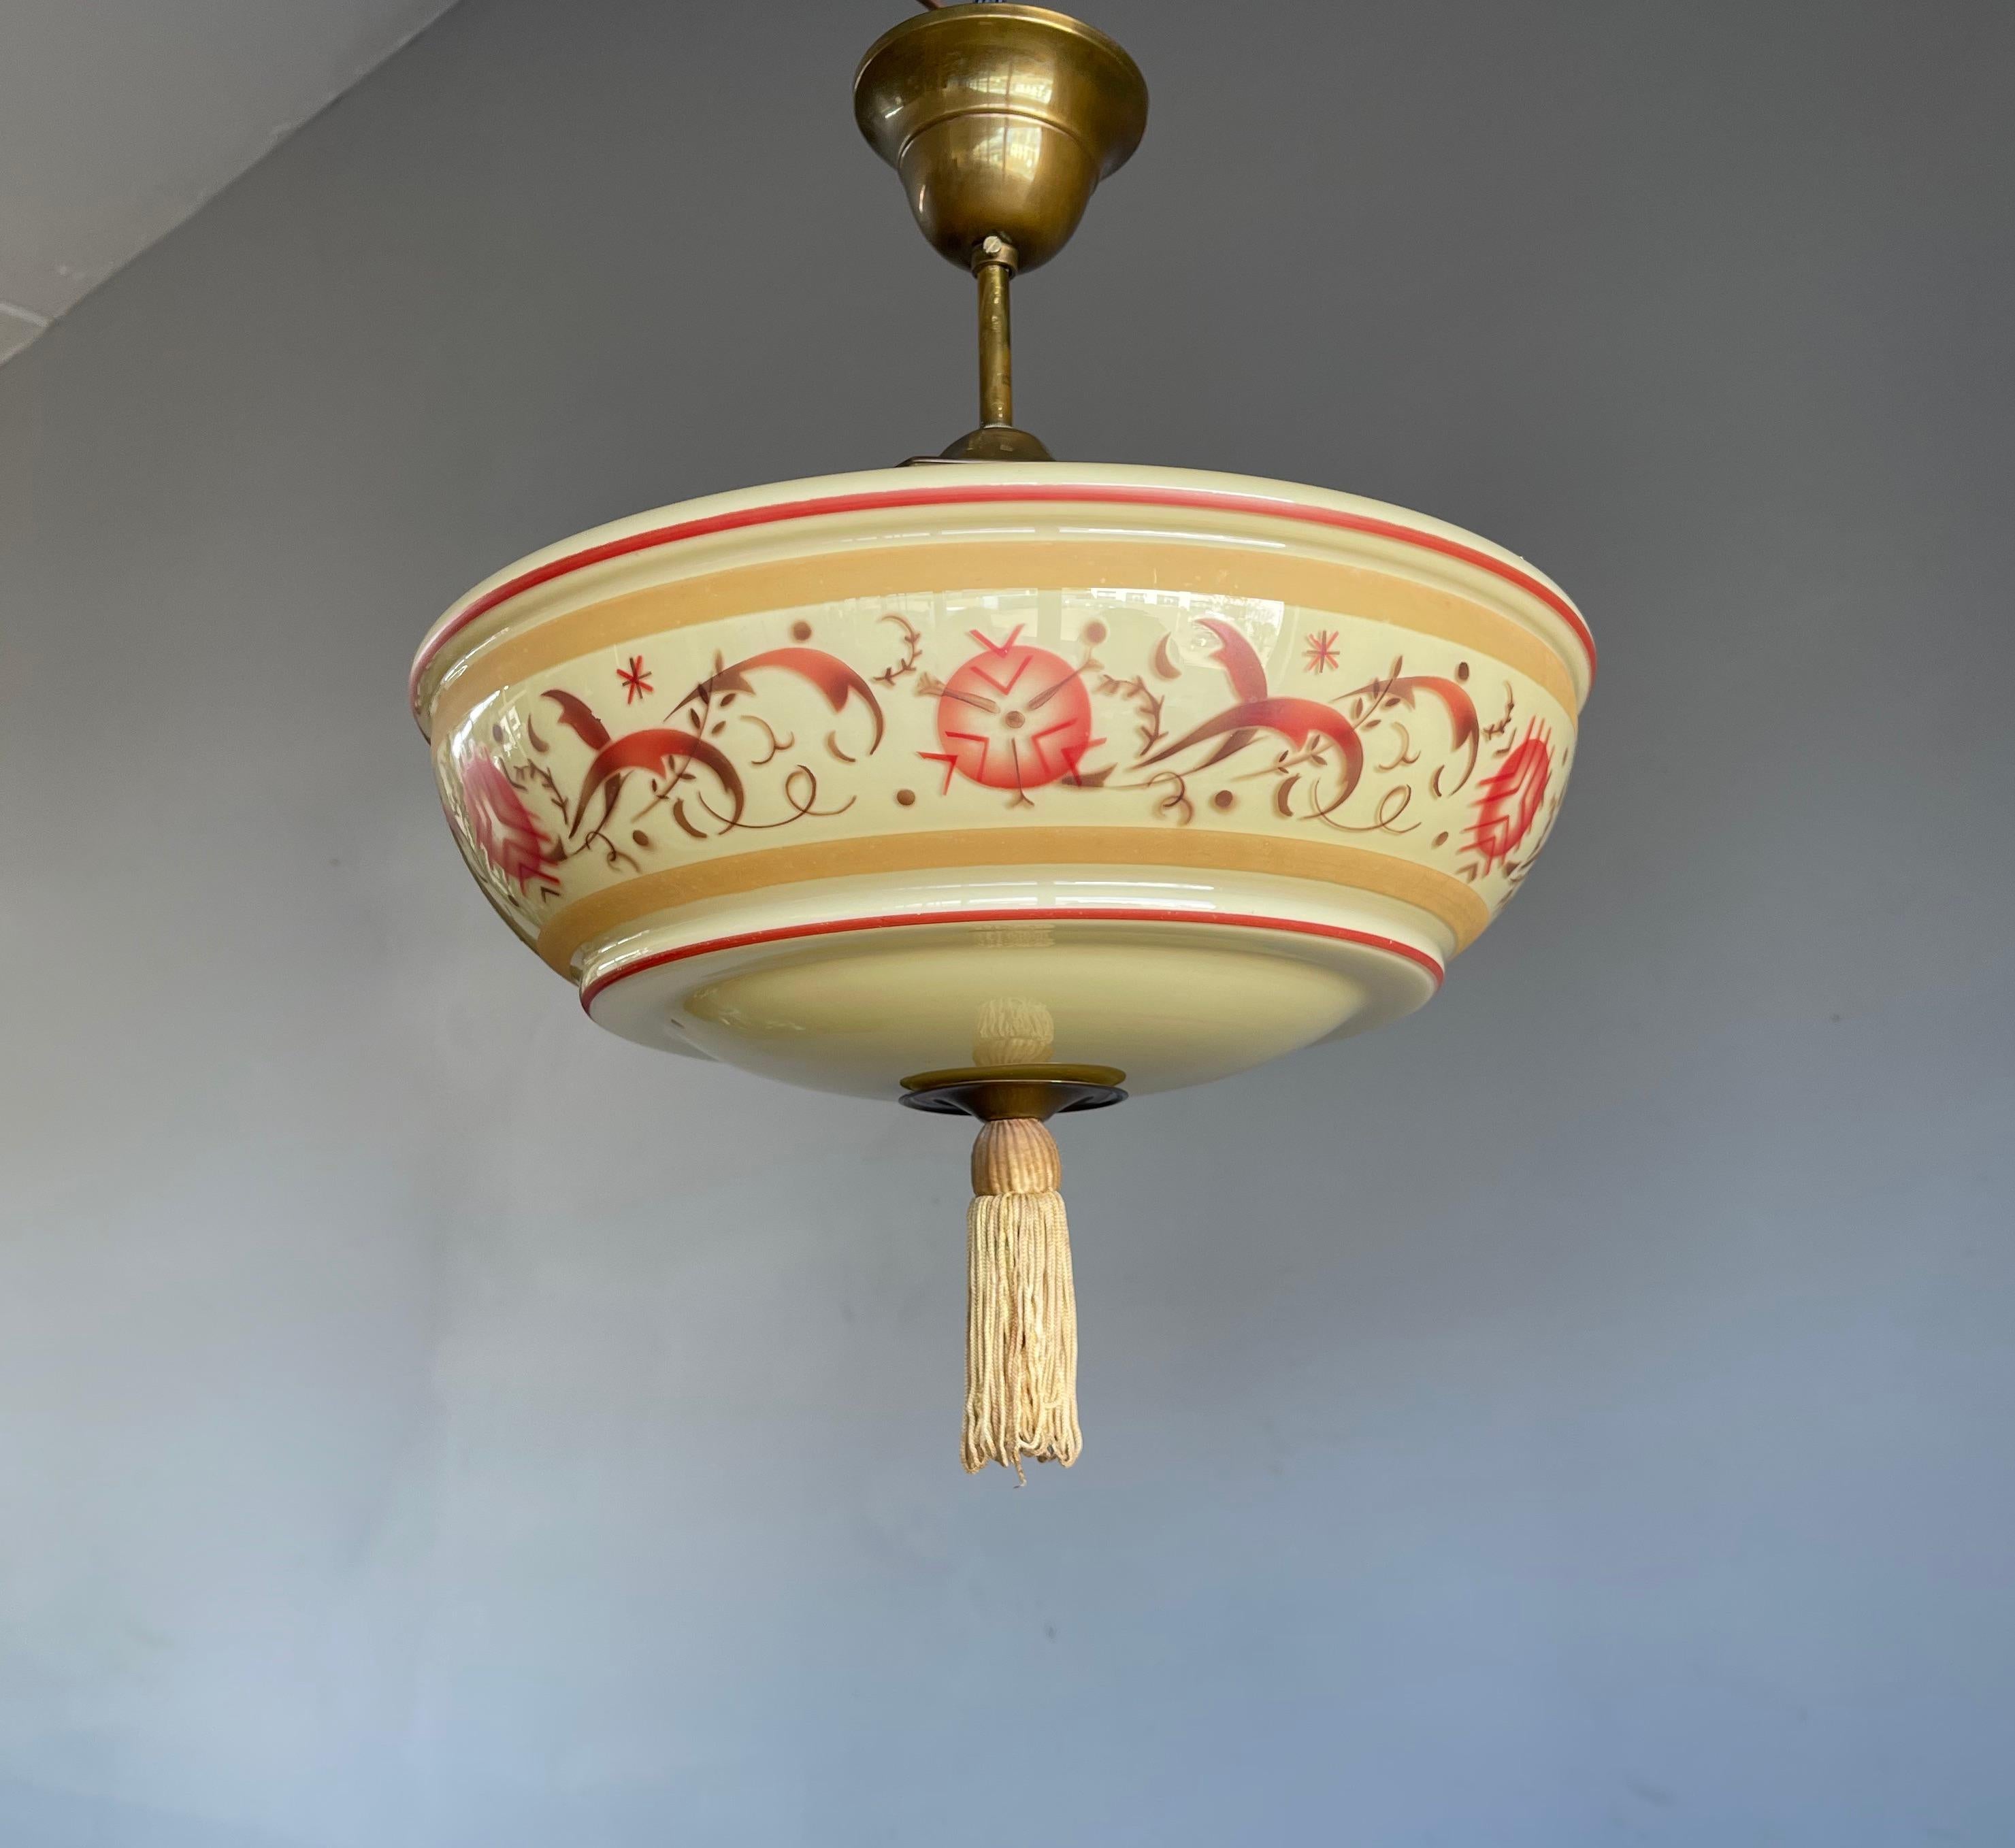 Handcrafted and finely painted, brass and glass ceiling fixture.

This rare Art Deco pendant is in excellent condition and a joy to own and look at. The hand-crafted glass shade is of a beautiful design and with the painted and organically